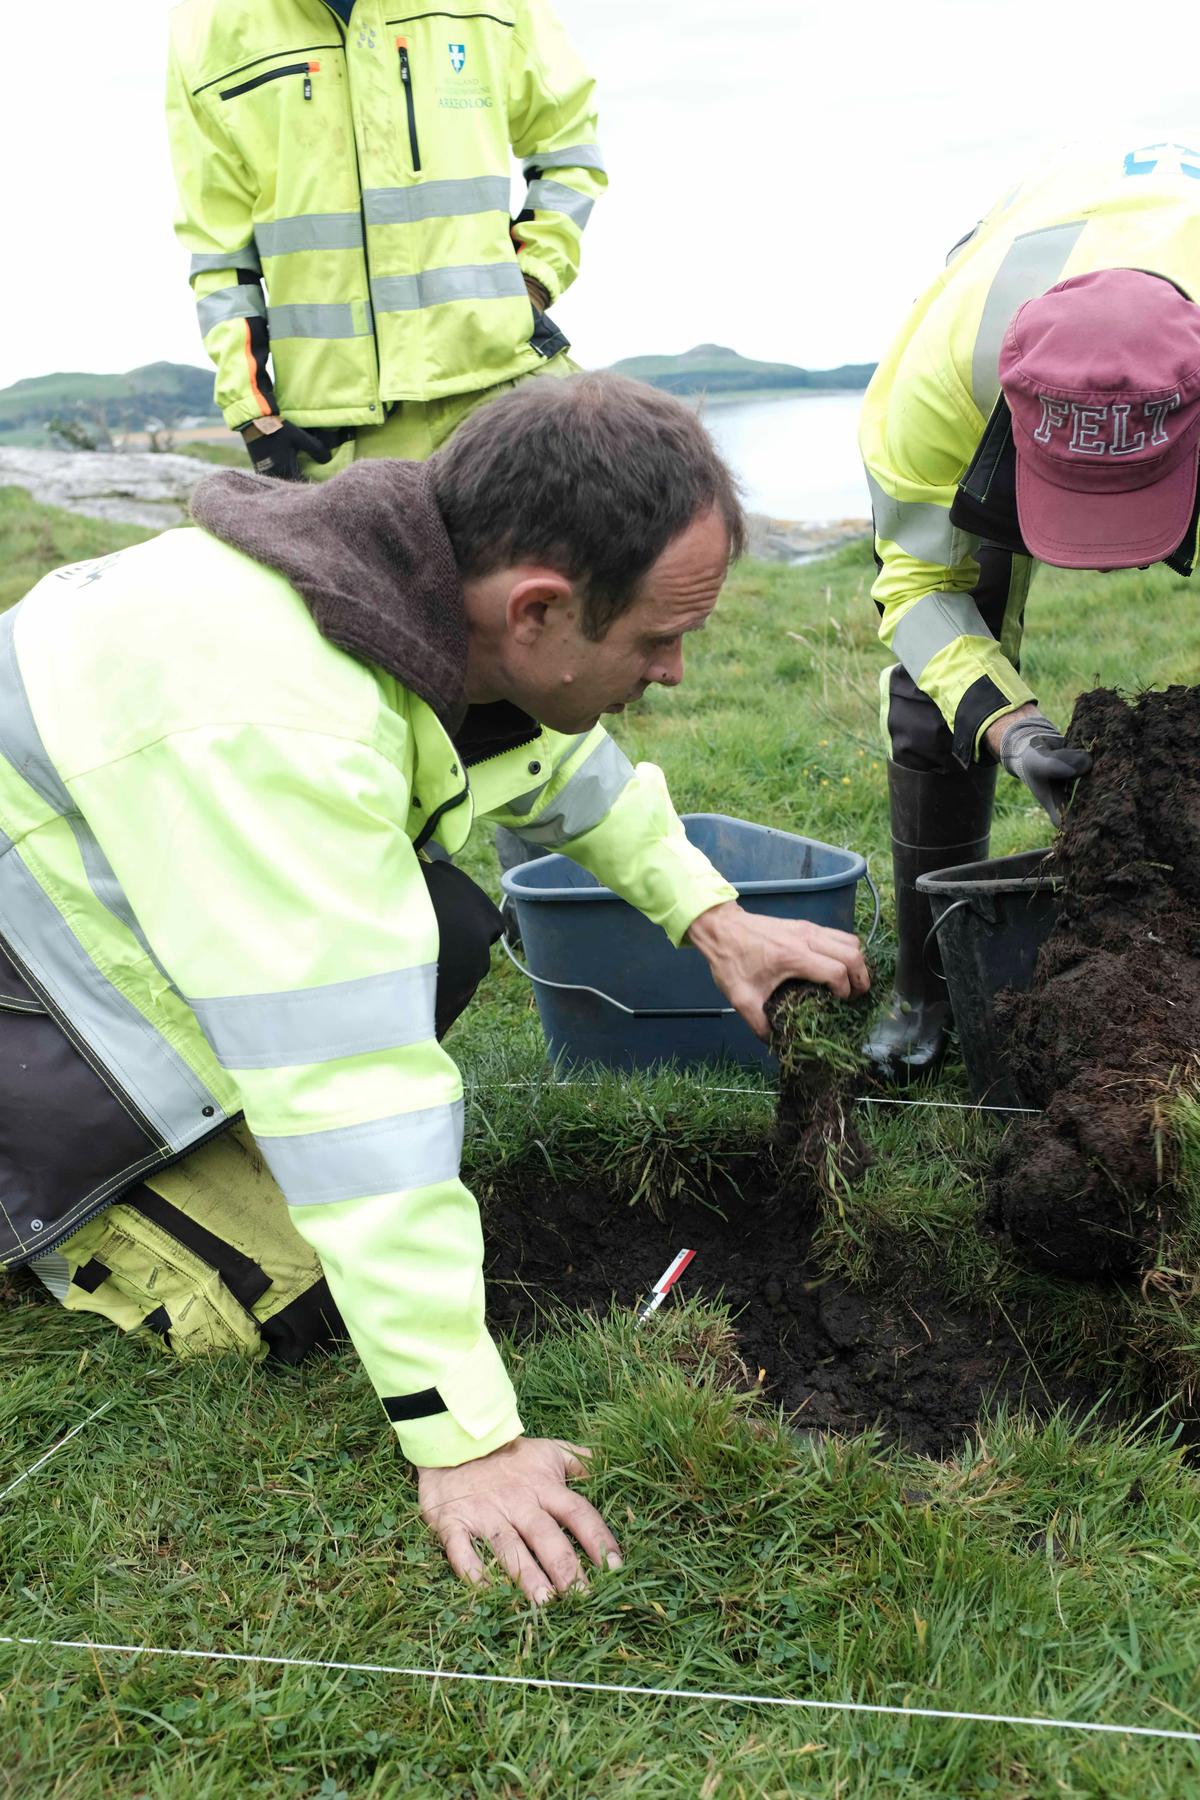 Archaeologists secure the location where the artifacts were found. (© Grethe Moéll Pedersen – The Museum of Archaeology, University of Stavanger)